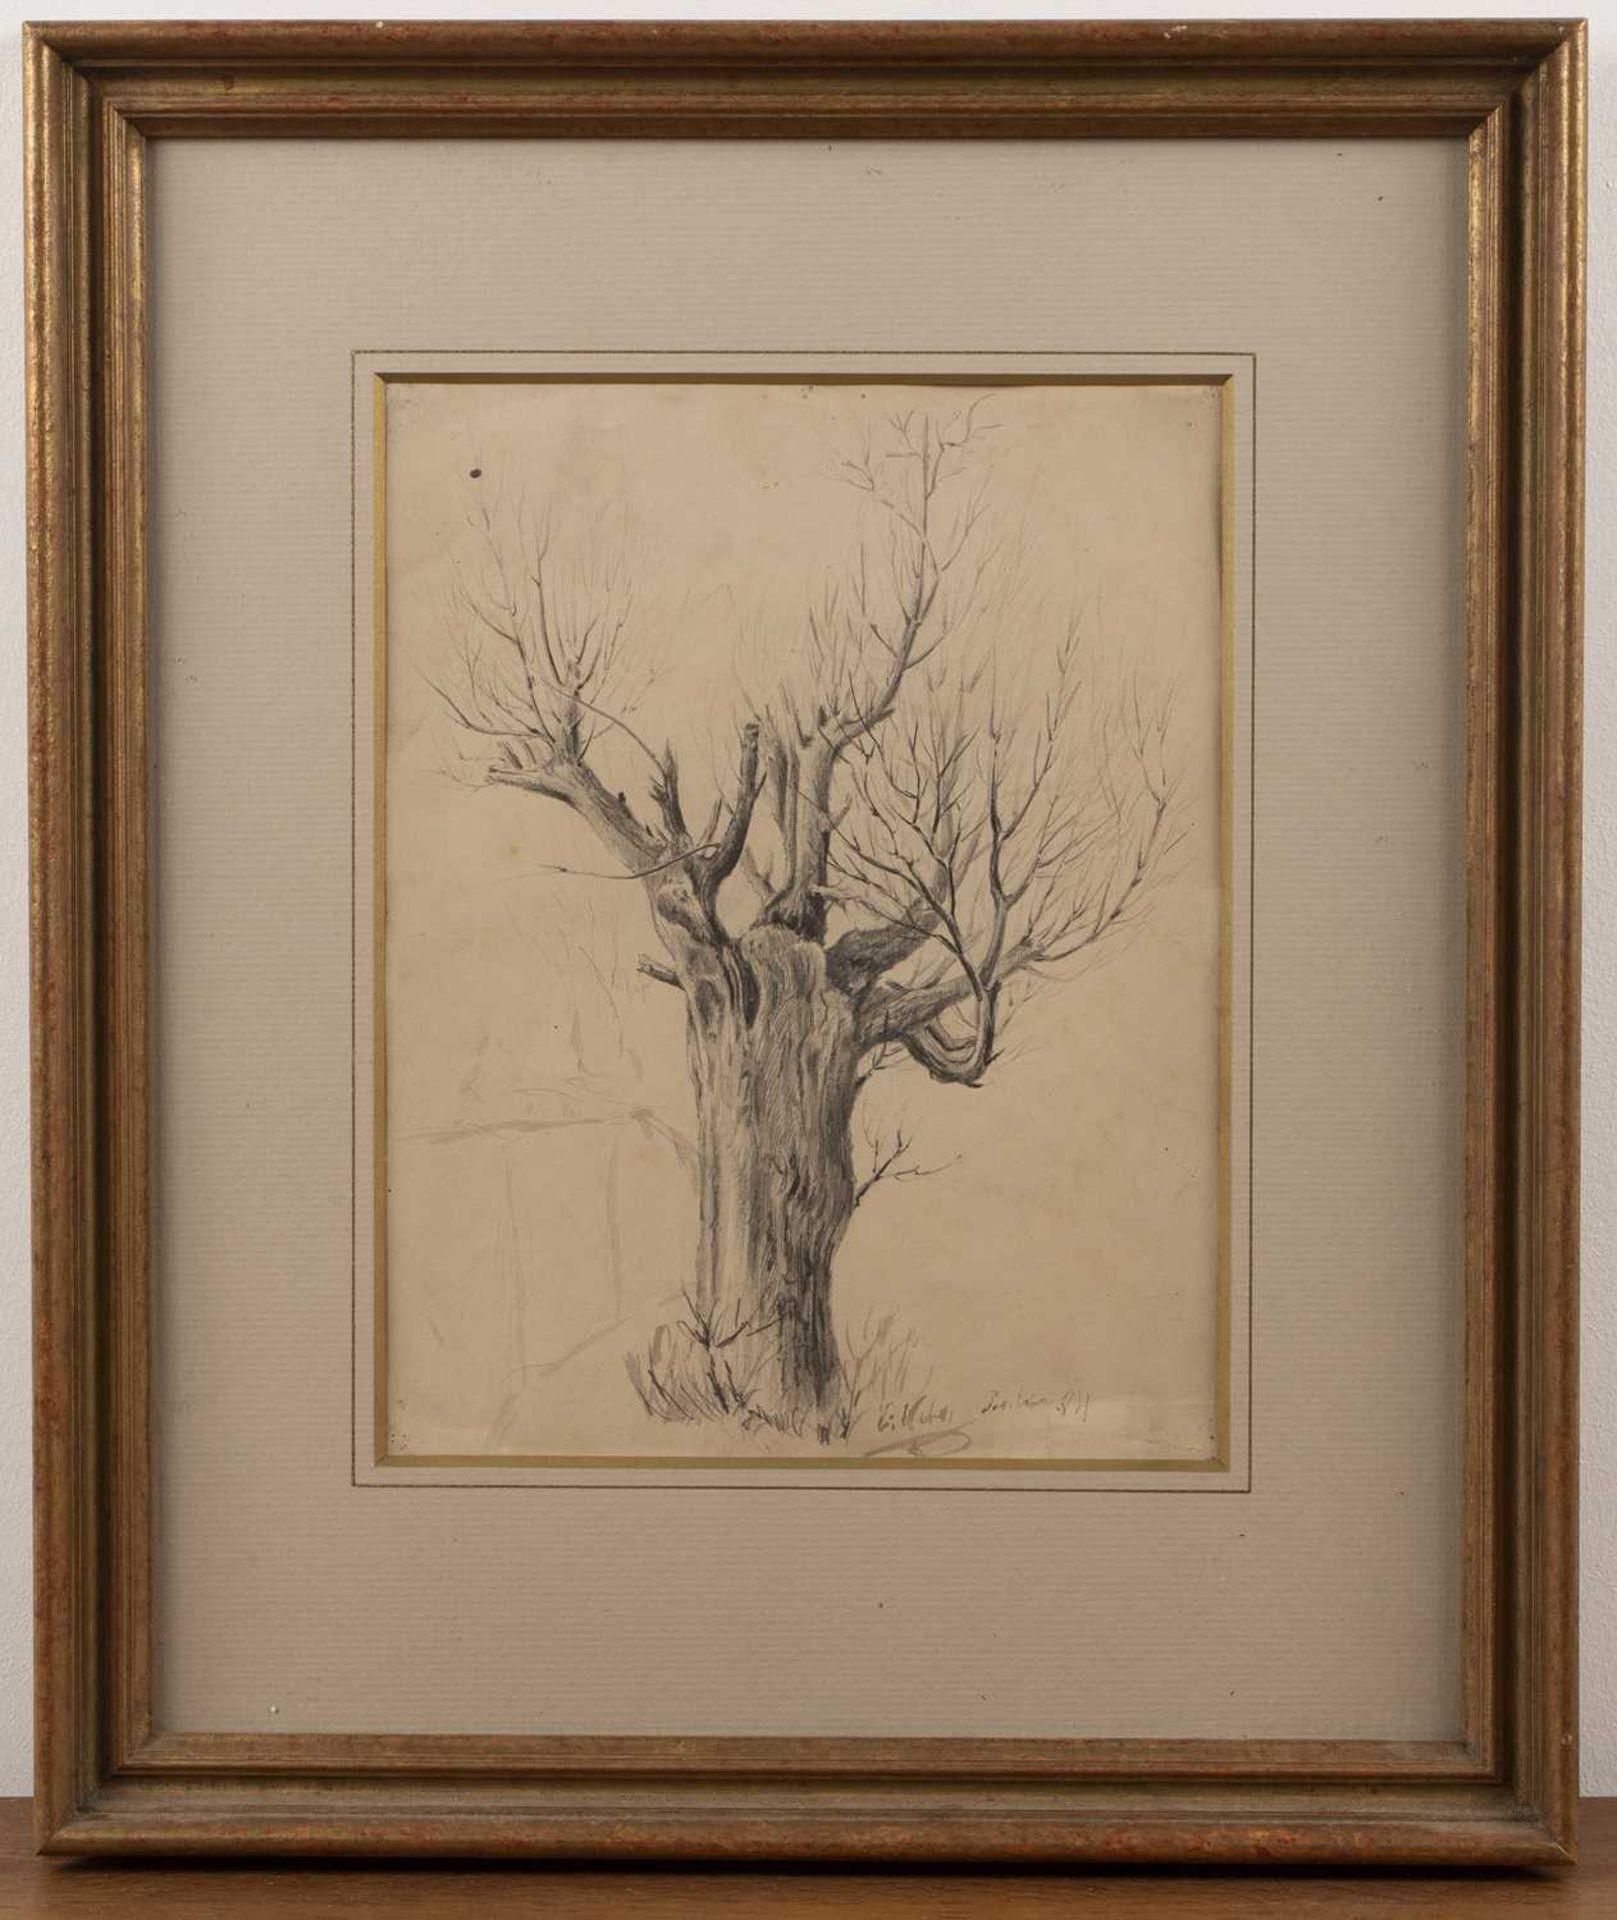 Erich Keber (20th Century Continental School) 'Untitled sketch of a tree', signed and dated '84' - Image 2 of 6